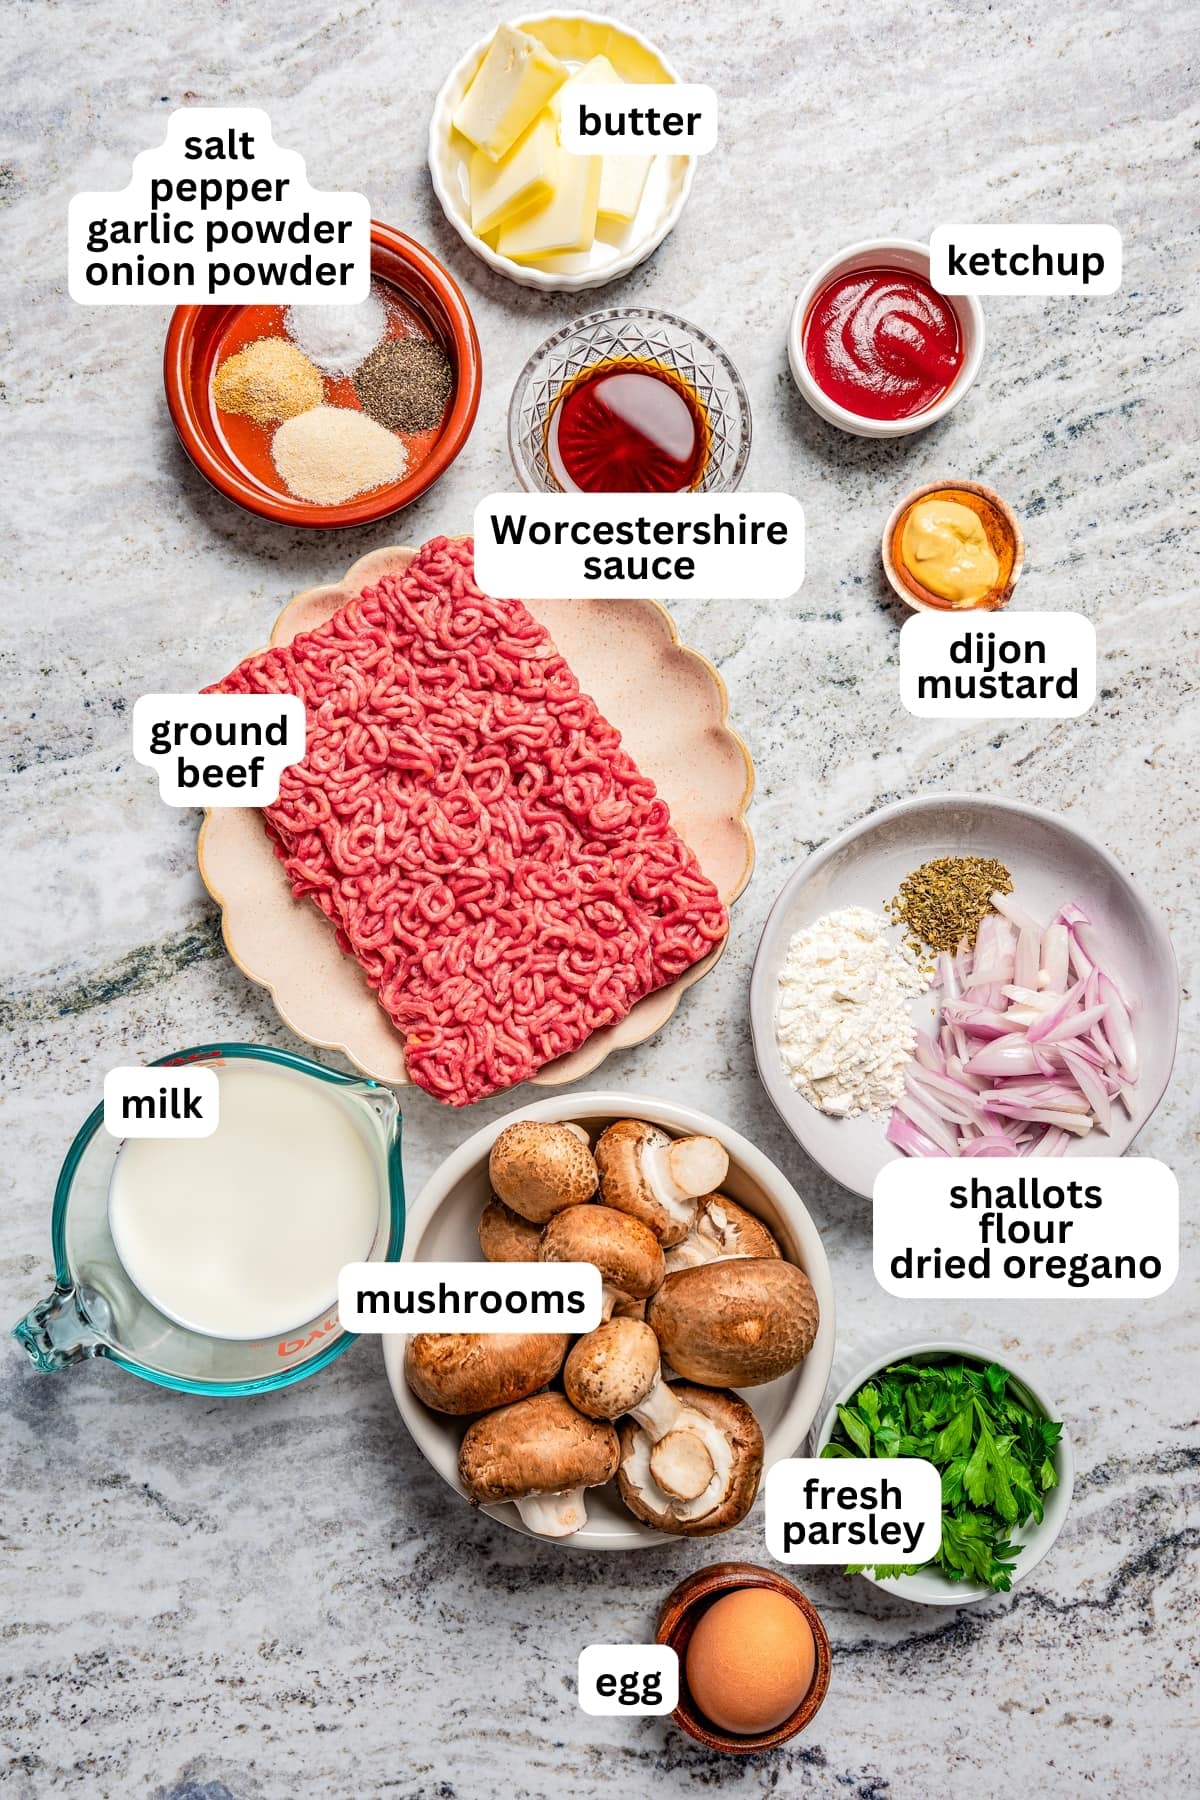 Overhead image of all the ingredients used for the Chopped Steak recipe.